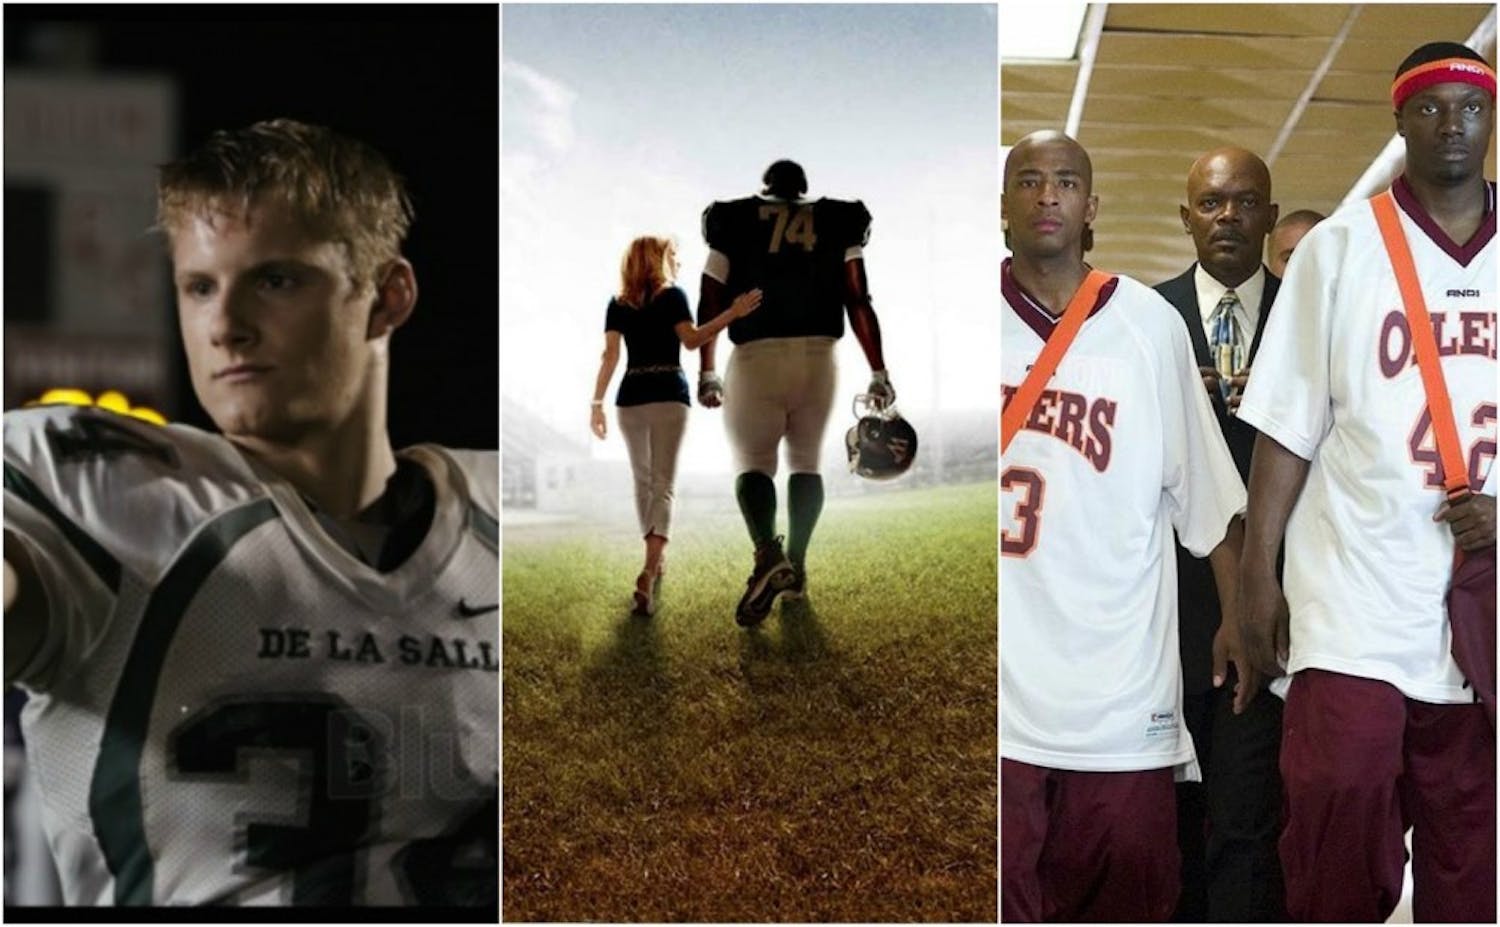 From left to right are images from the movies “When The Game Stands Tall,” “The Blind Side” and “Coach Carter.”